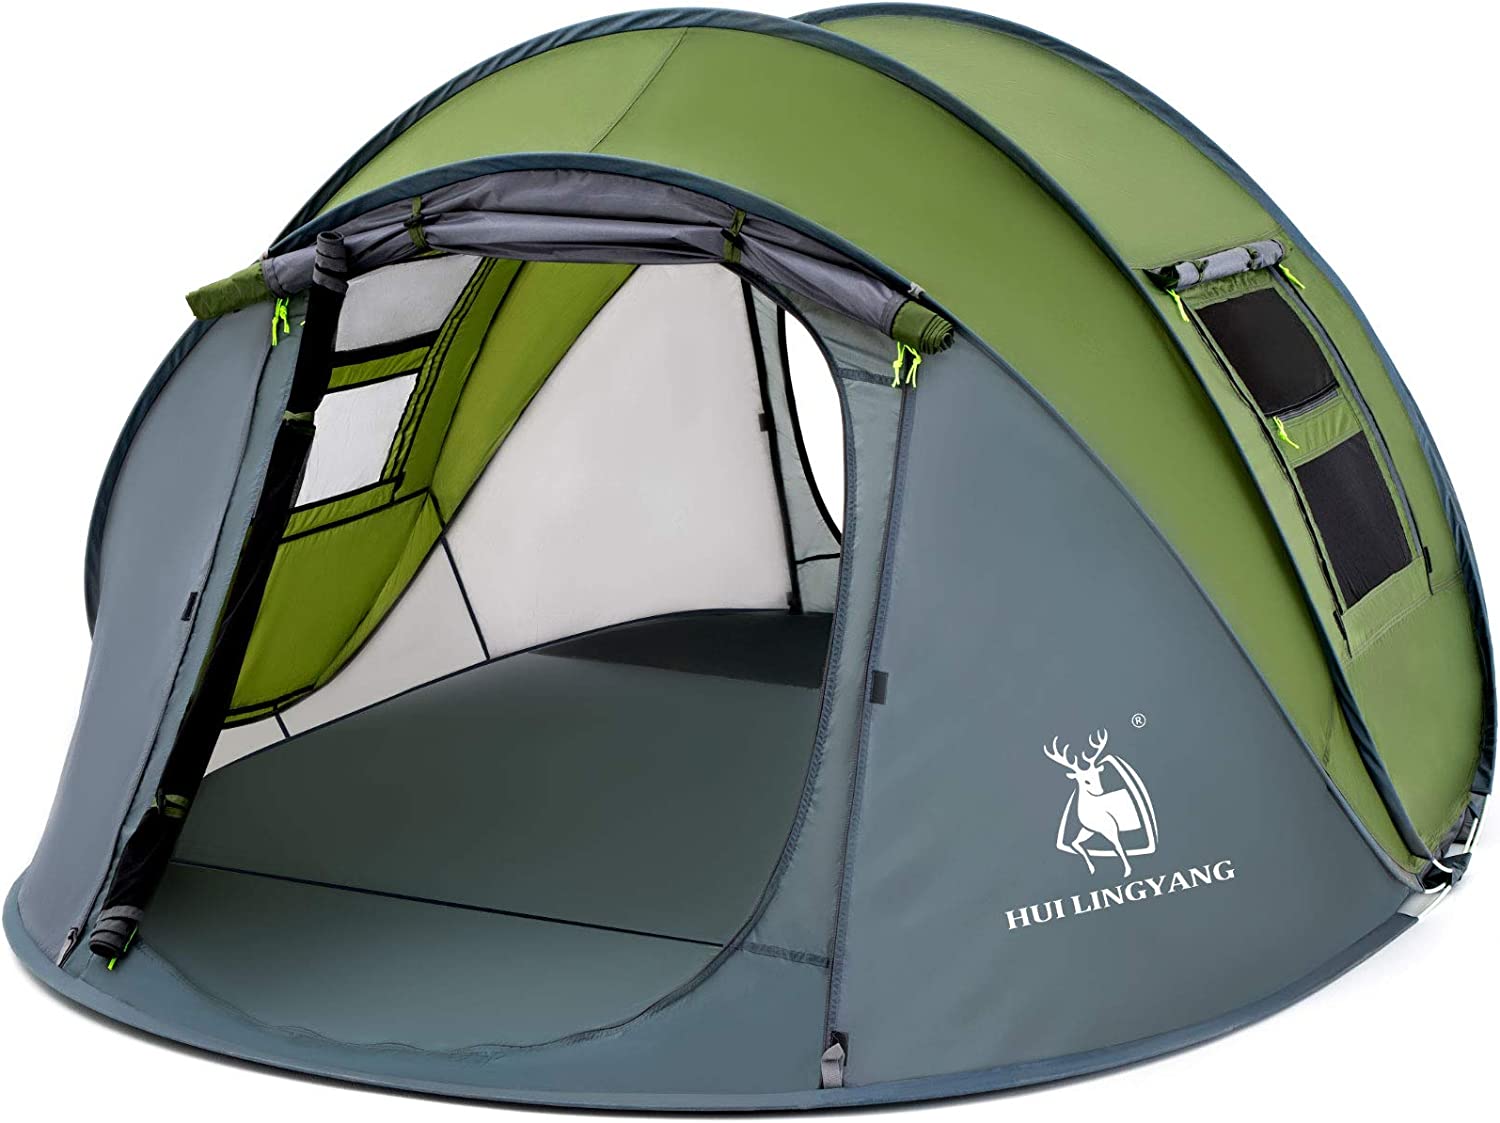 HUI LINGYANG 4 Person Easy Pop Up Tent,9.5’X6.6’X52”,Waterproof, Automatic Setup,2 Doors-Instant Family Tents for Camping, Hiking & Traveling